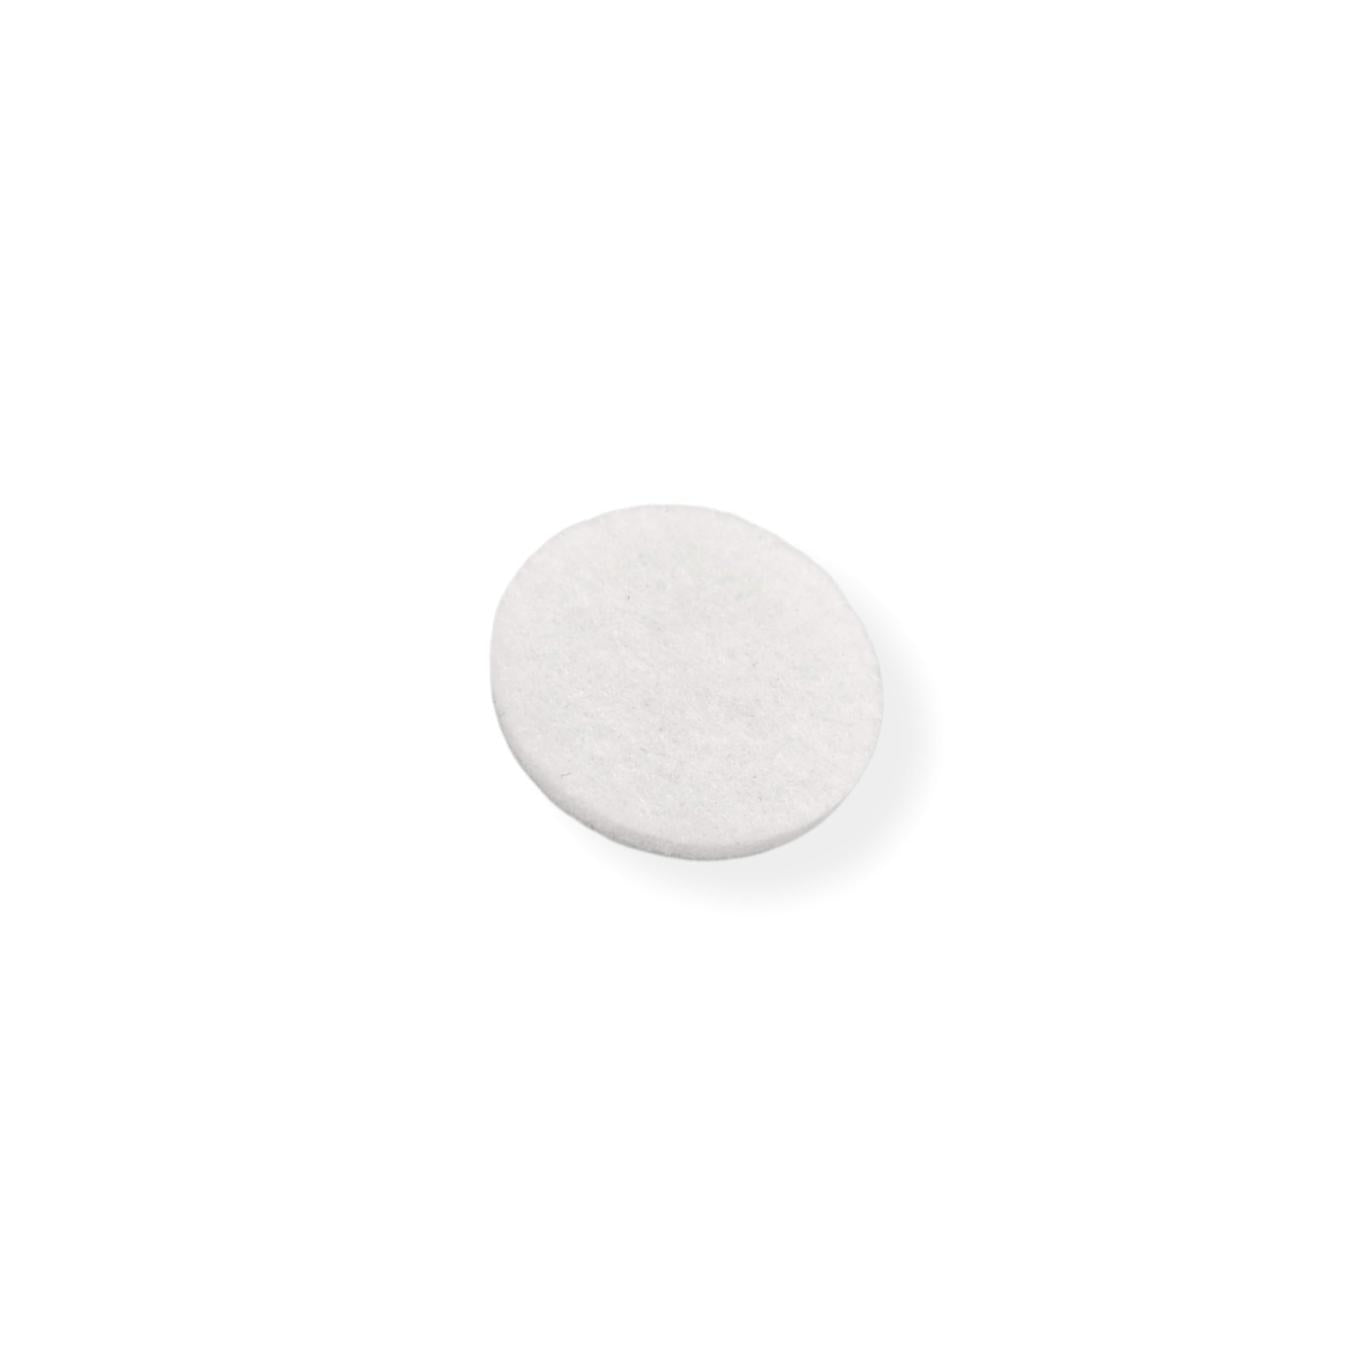 Felt Pads - White Self Adhesive Stick on Felt - Round 15mm Diameter - Made in Germany - Keay Vital Parts